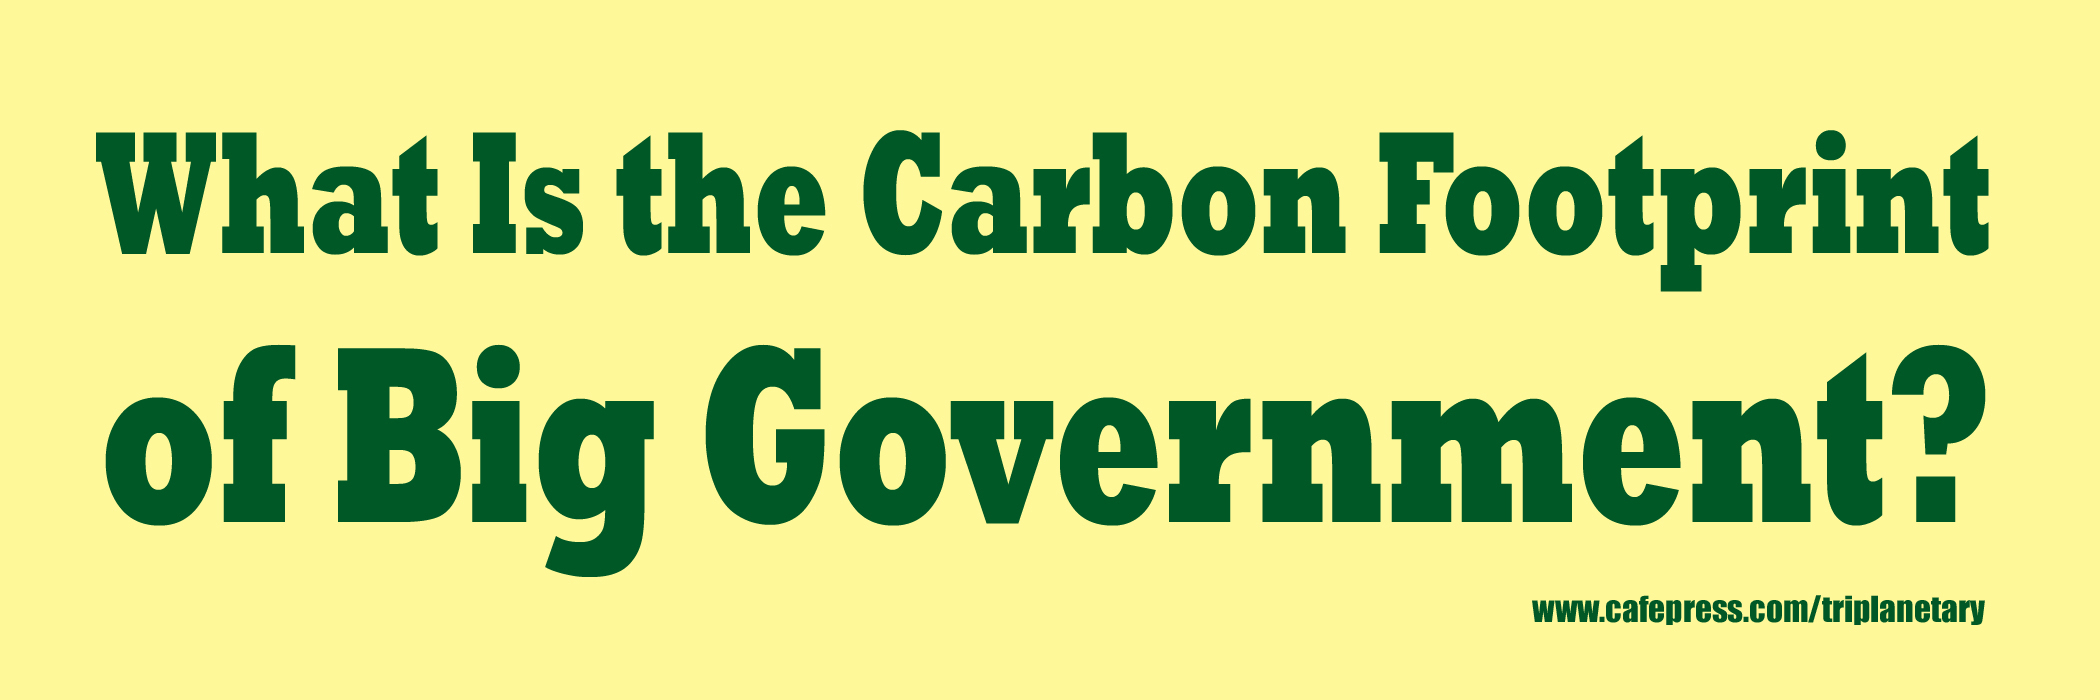 Yellow and green image of bumper sticker: 'What is the Carbon Footprint of Big Government?'